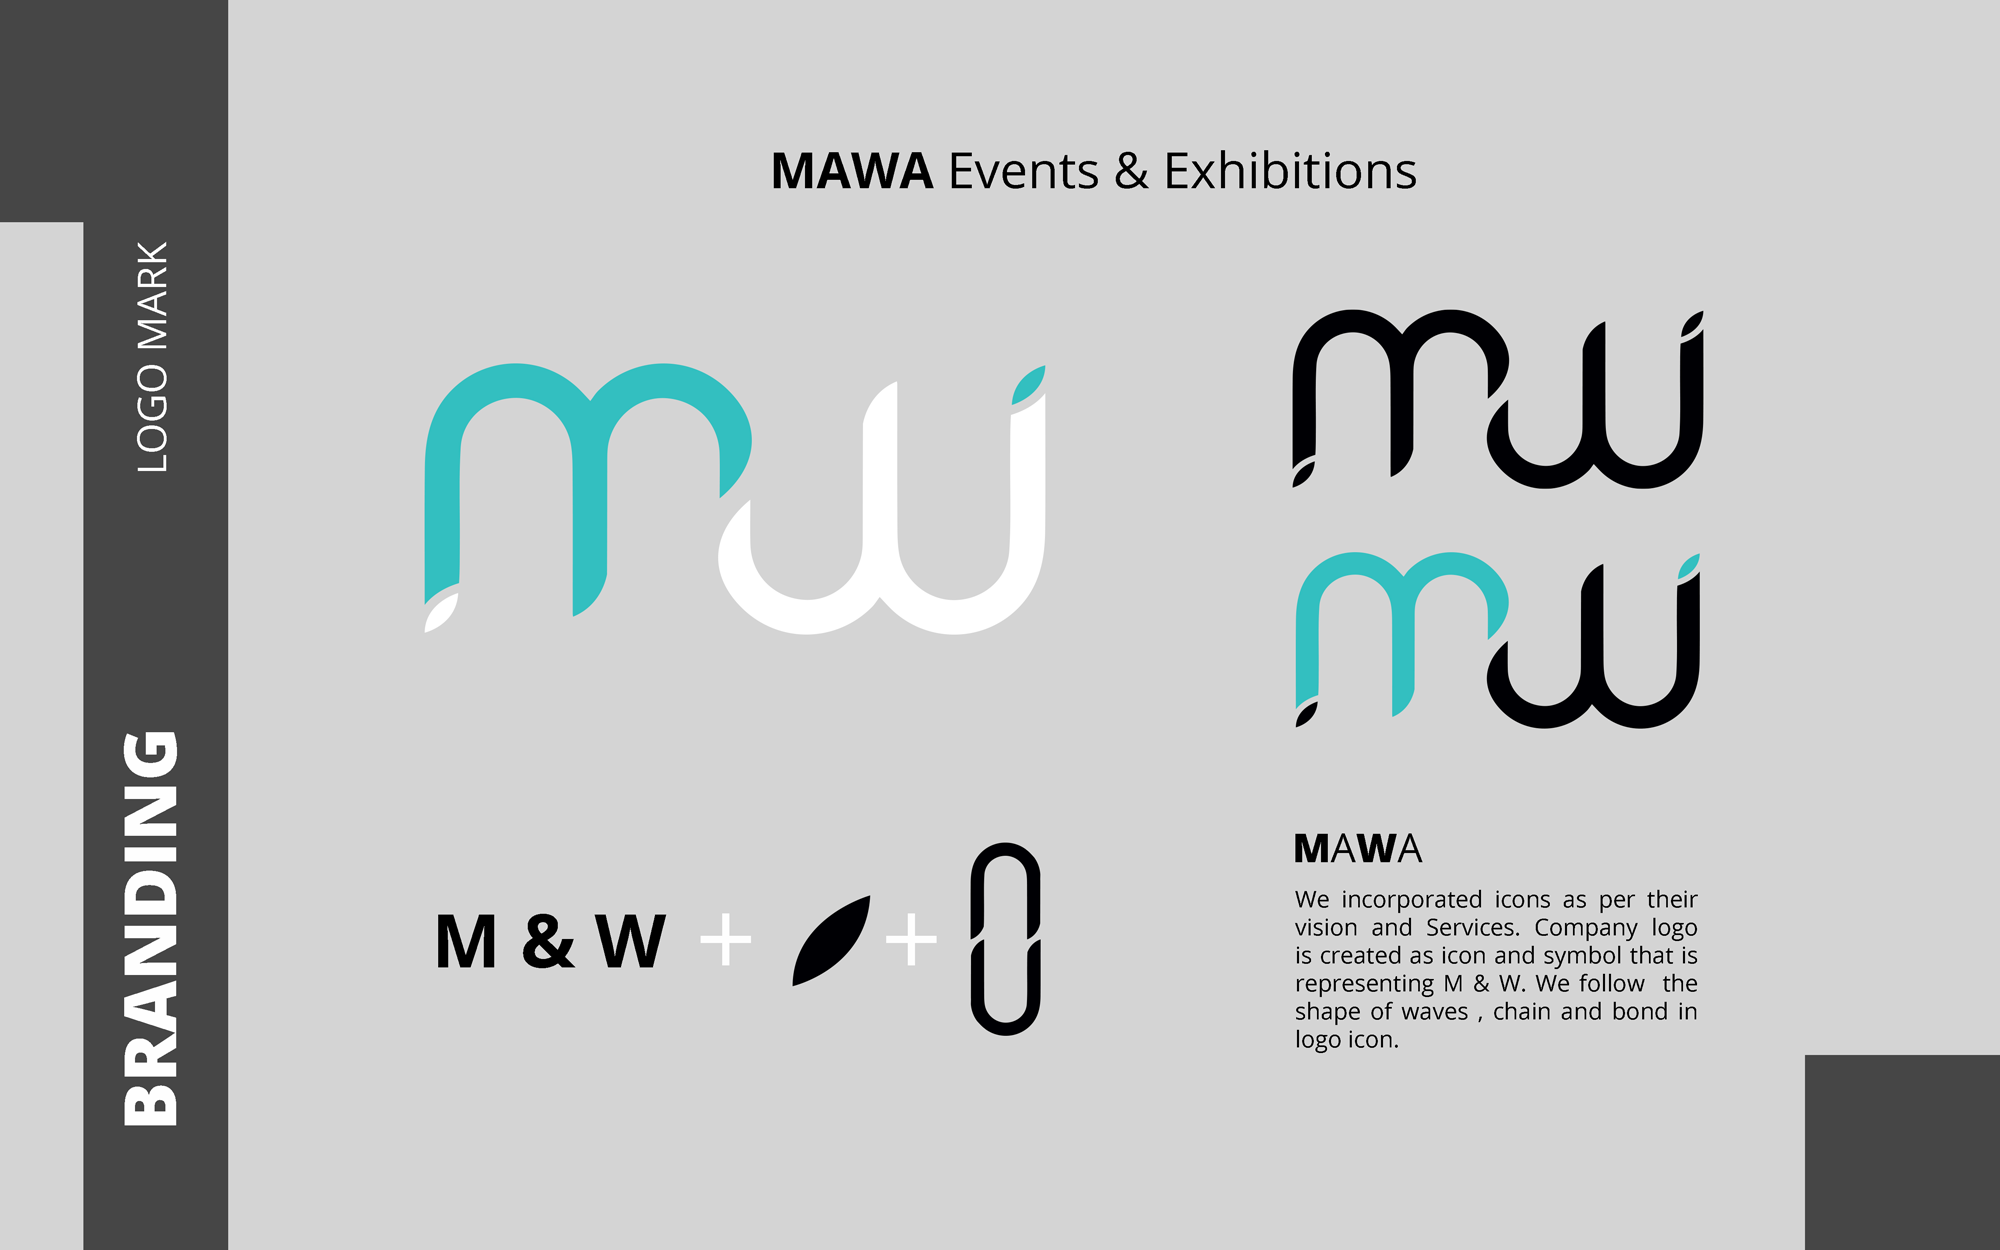 Mawa Events & Exhibitions